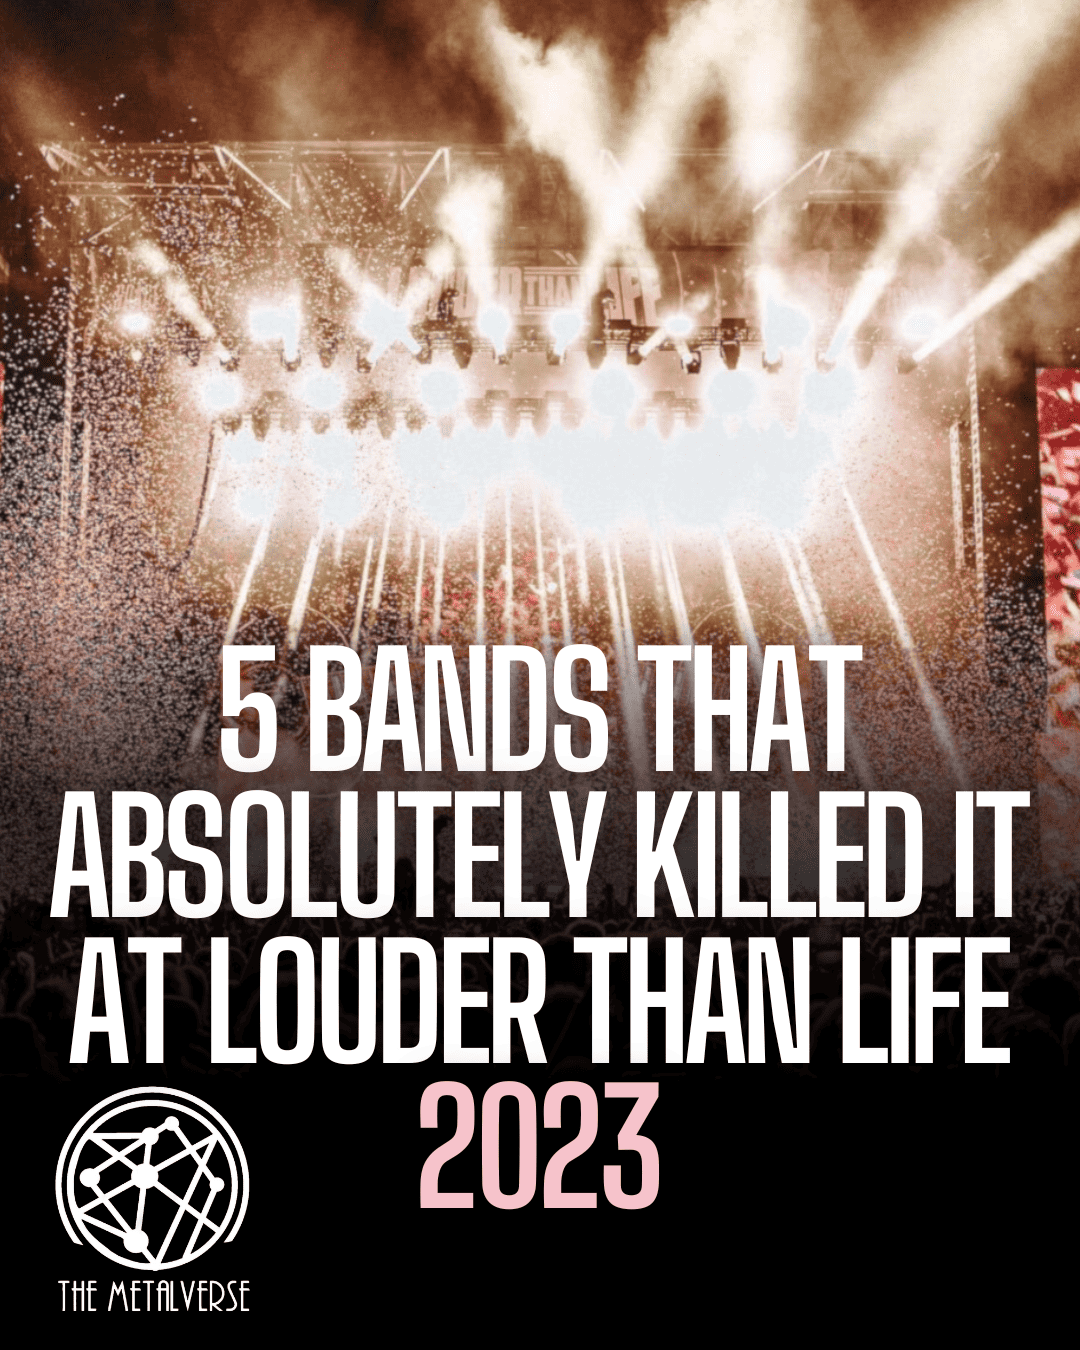 5 Bands That Absolutely Killed It At Louder Than Life 2023